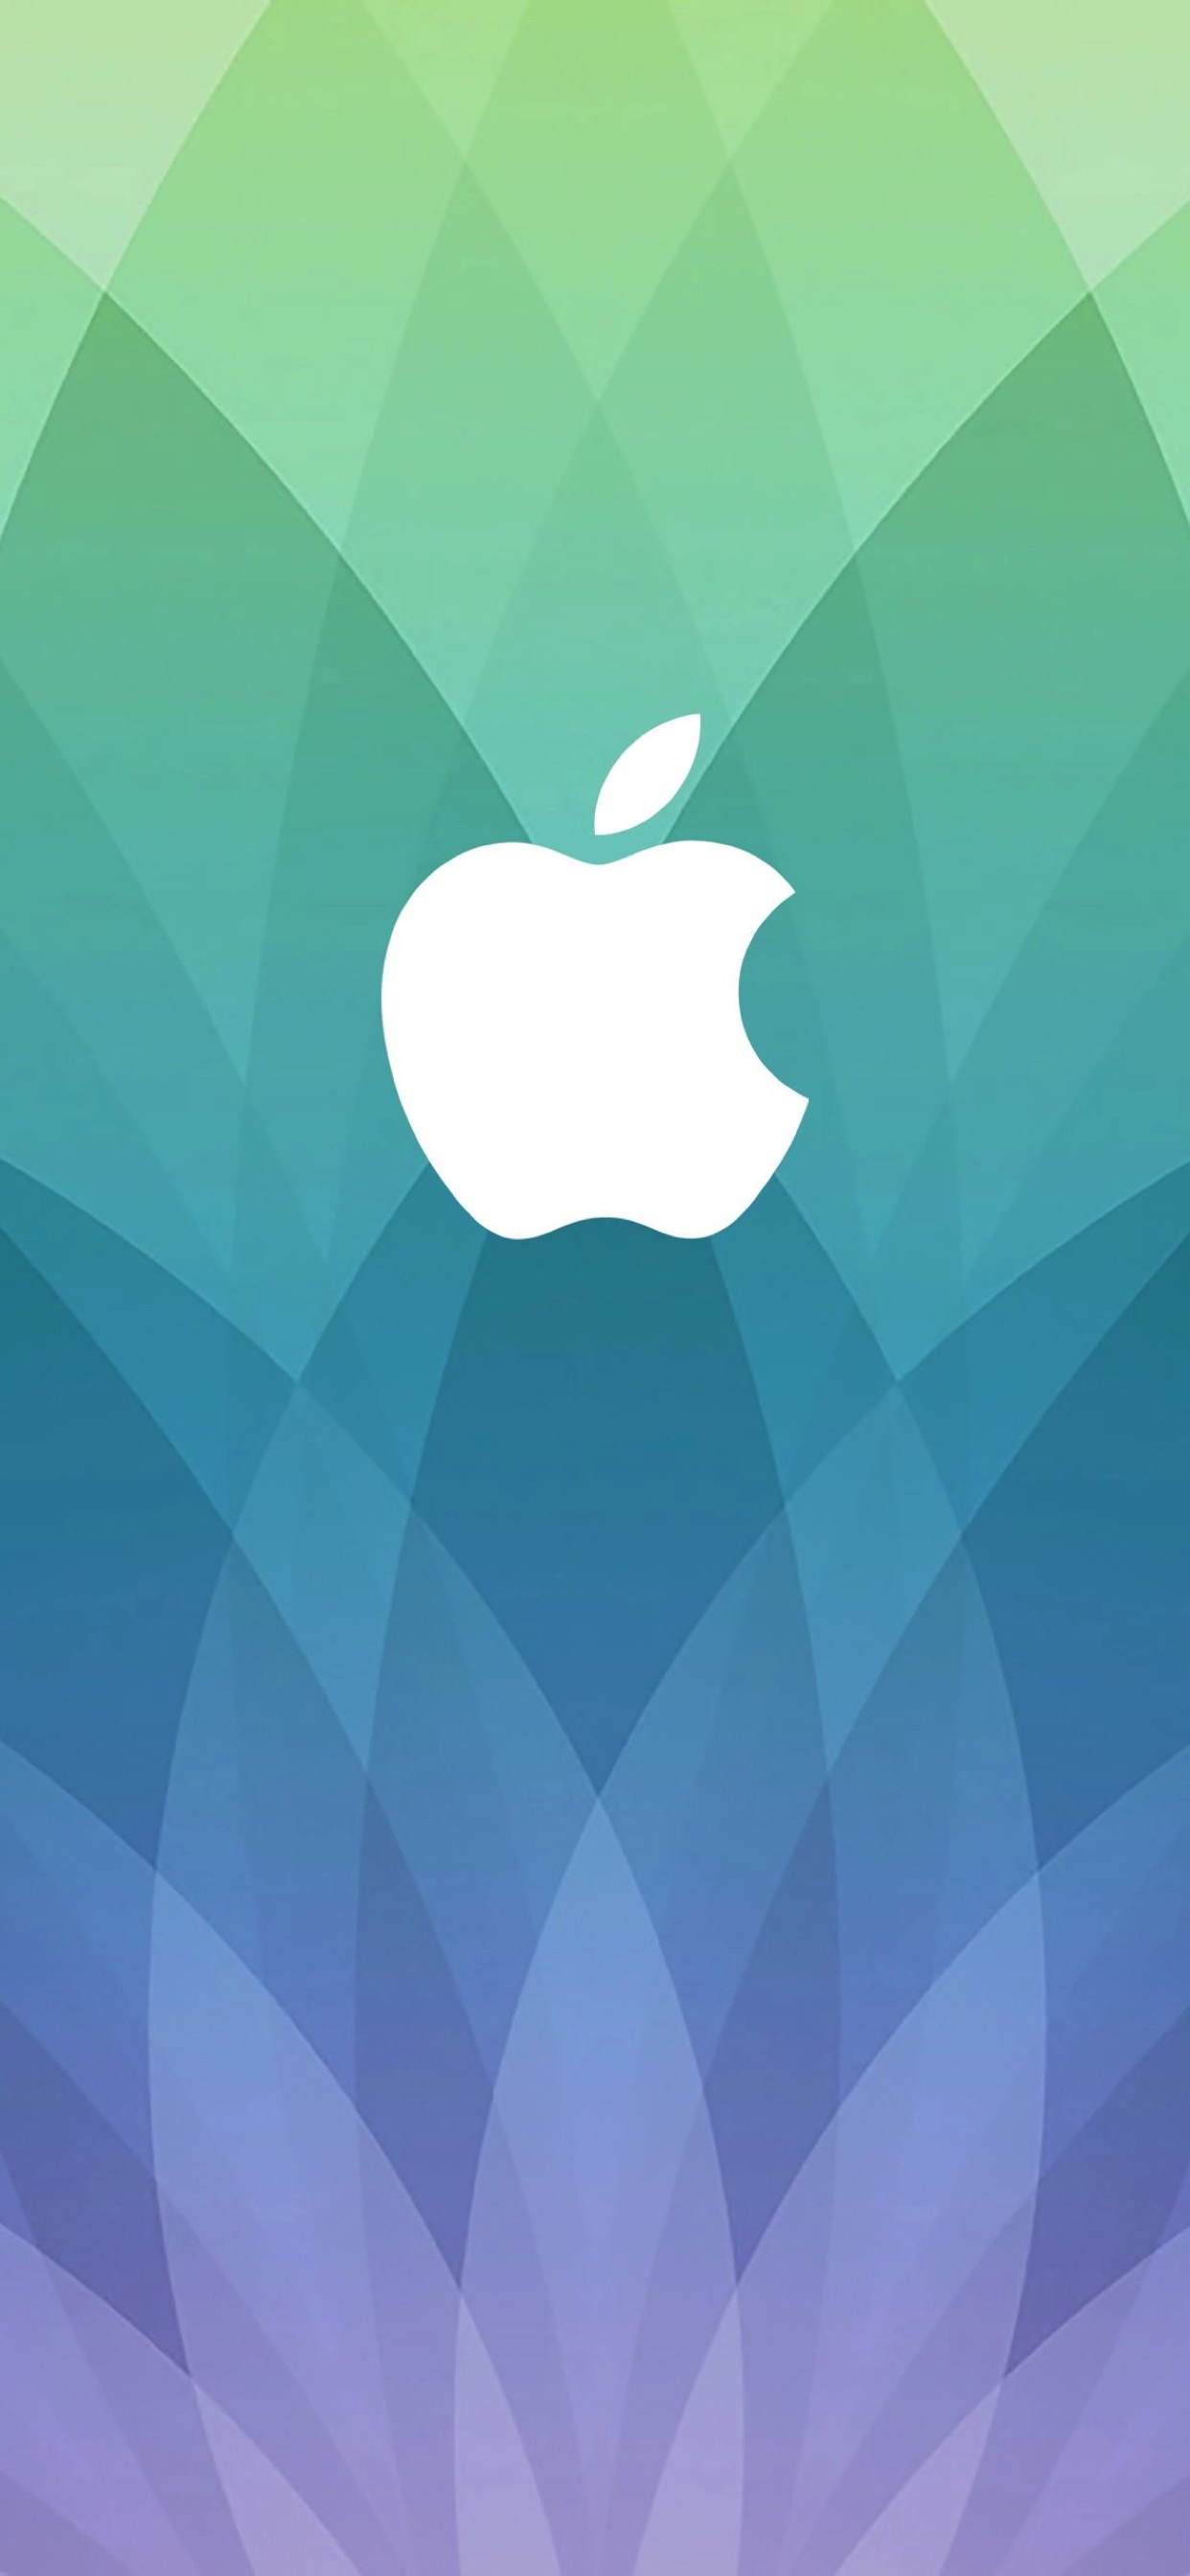 Apple logo spring events, green, and blue purple ...